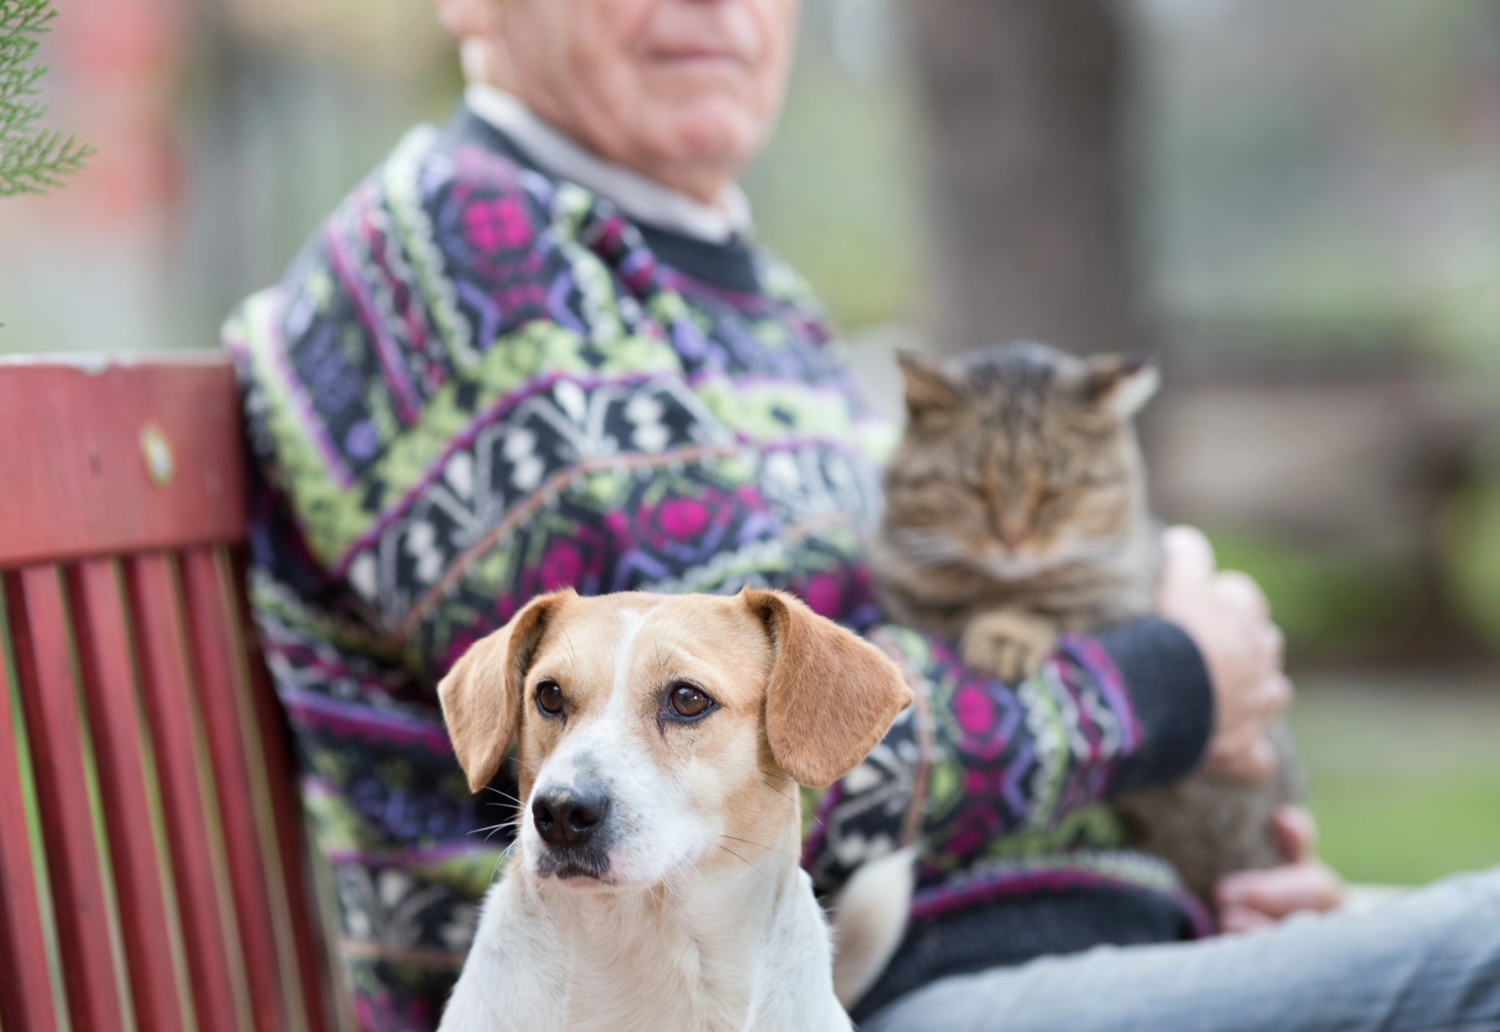 senior man sitting on a bench with two pets: a dog and a cat